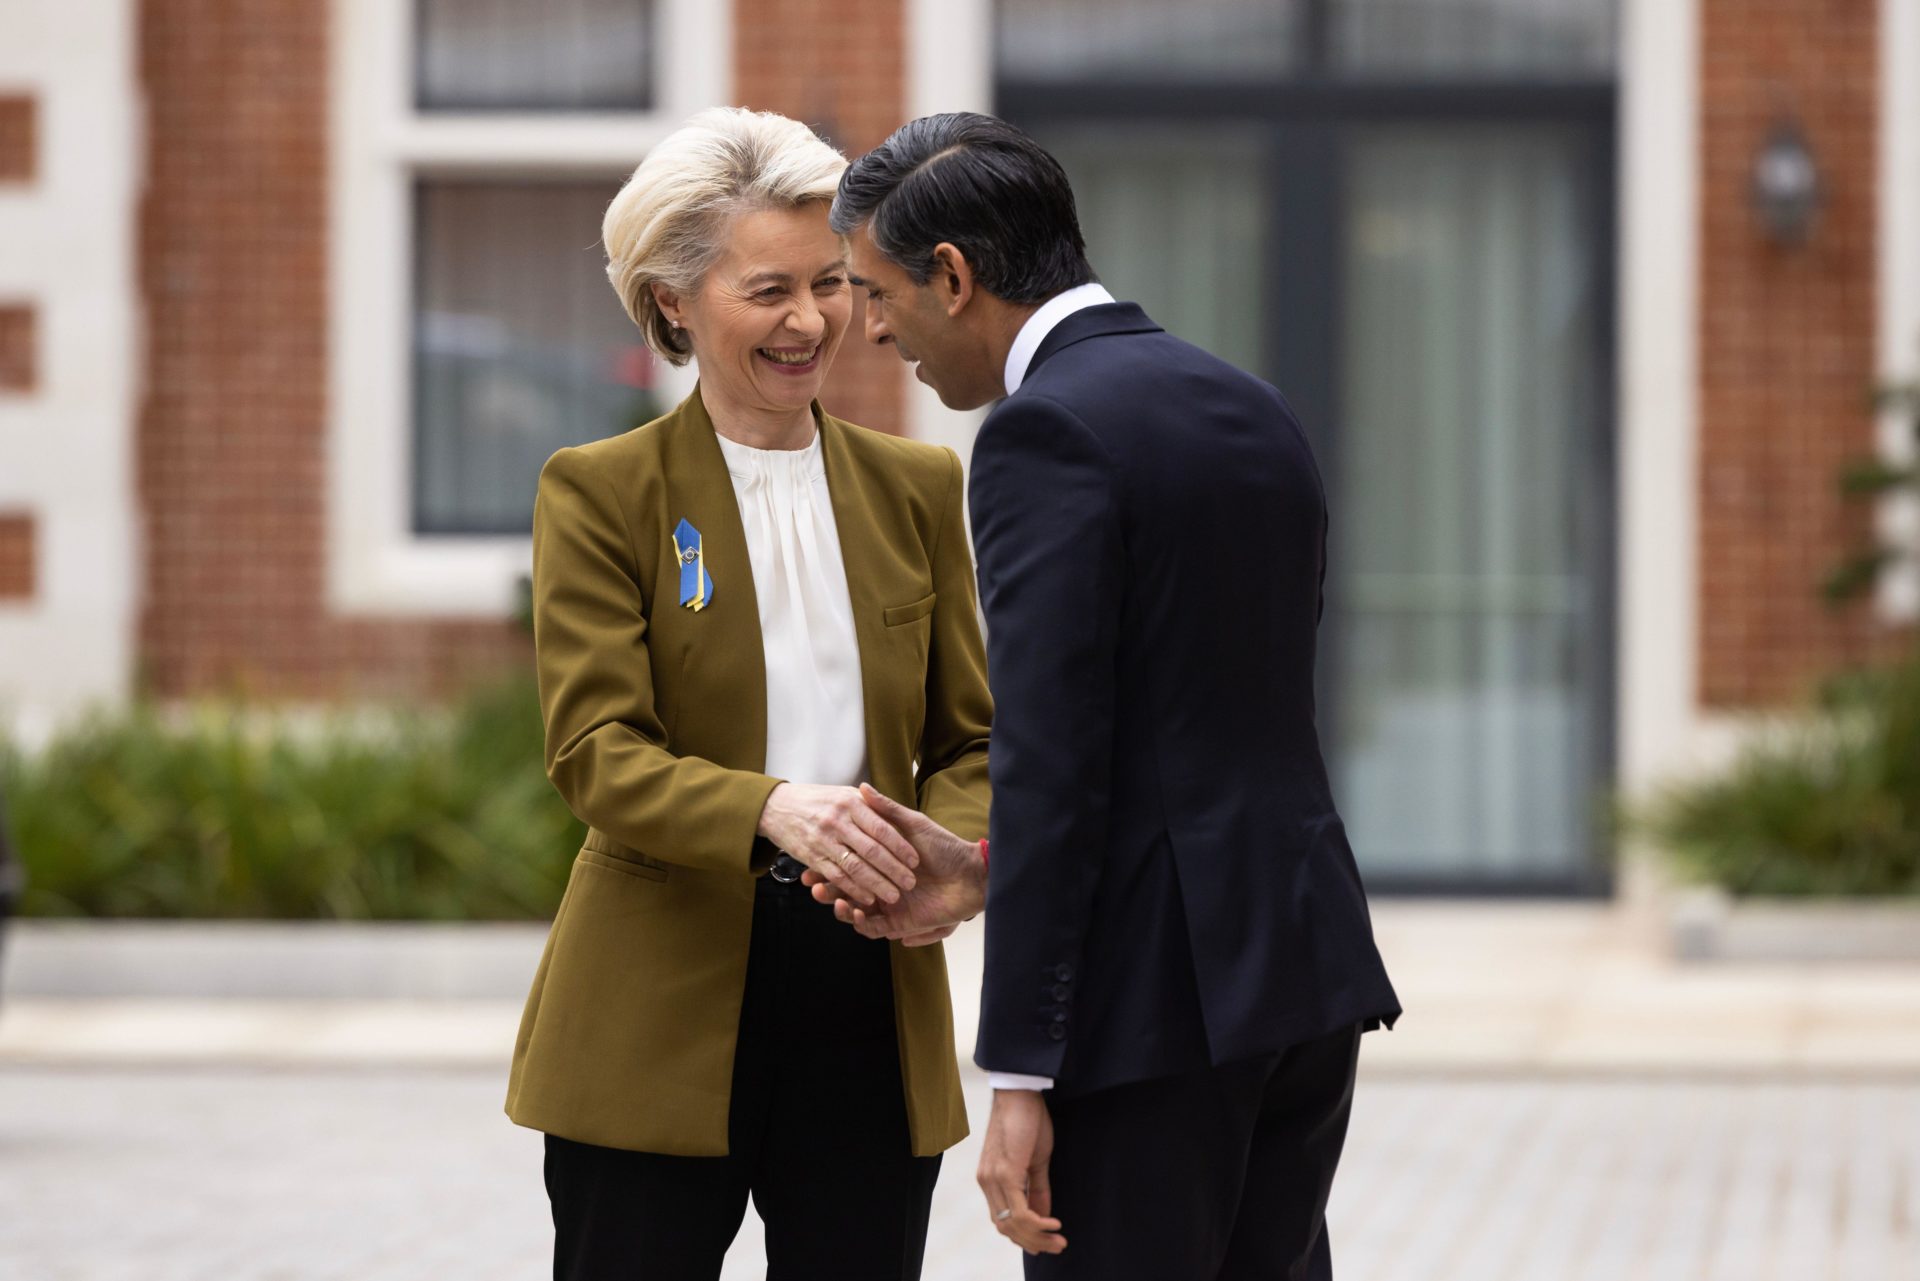 UK Prime Minister Rishi Sunak welcomes European Commission president Ursula von der Leyen ahead of a Brexit meeting, 27-02-2023. Image: PA Images / Alamy